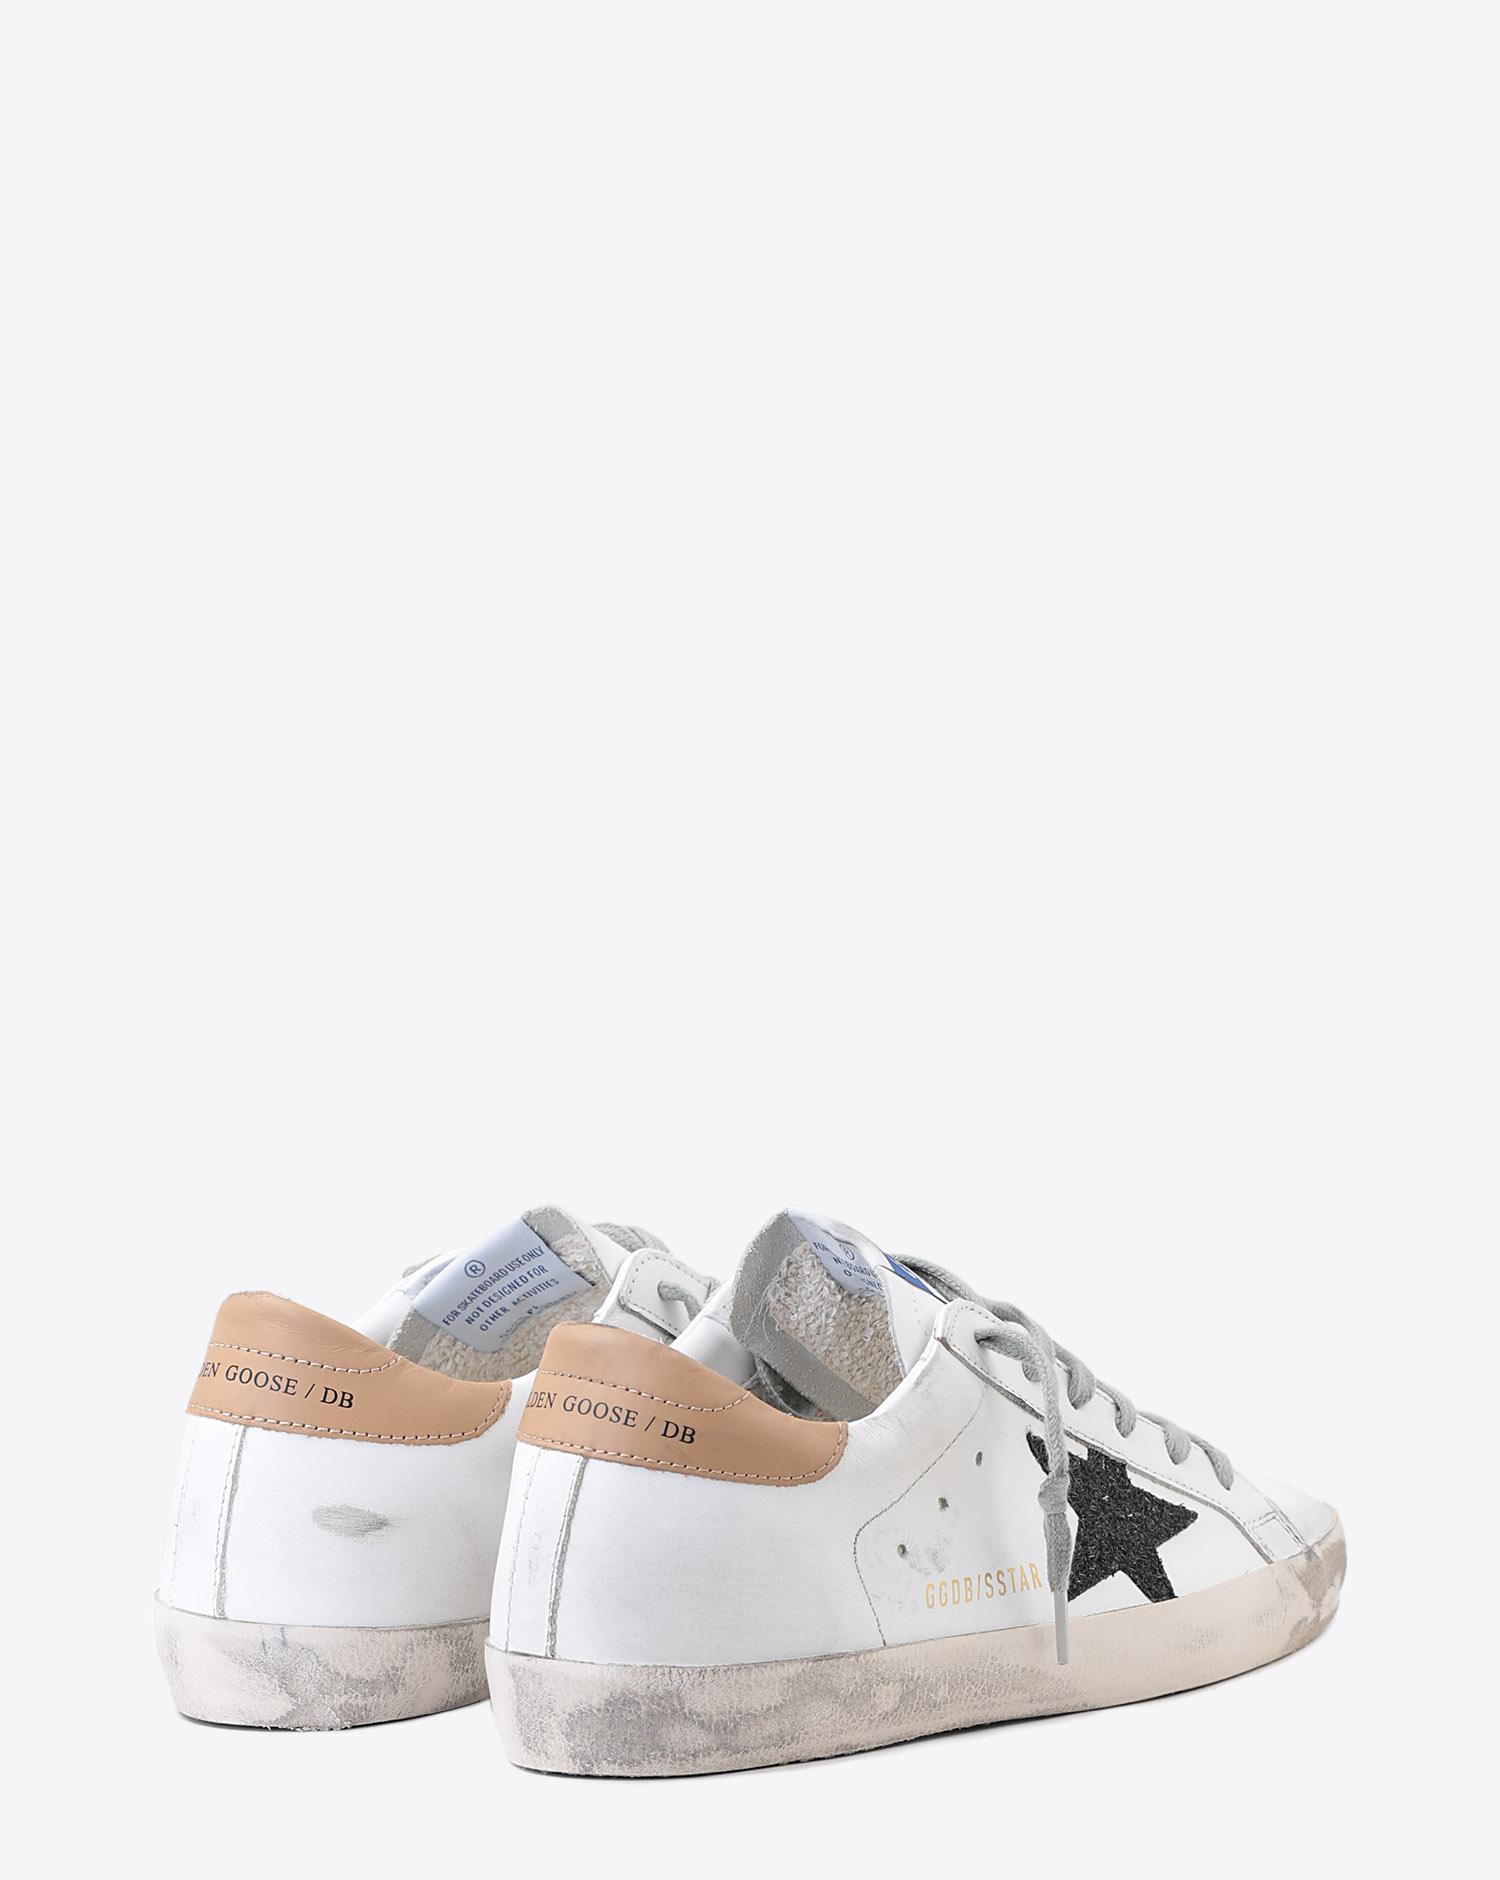 Golden Goose Woman Pré-Collection Sneakers Superstar - White Sand - Black Glitter  